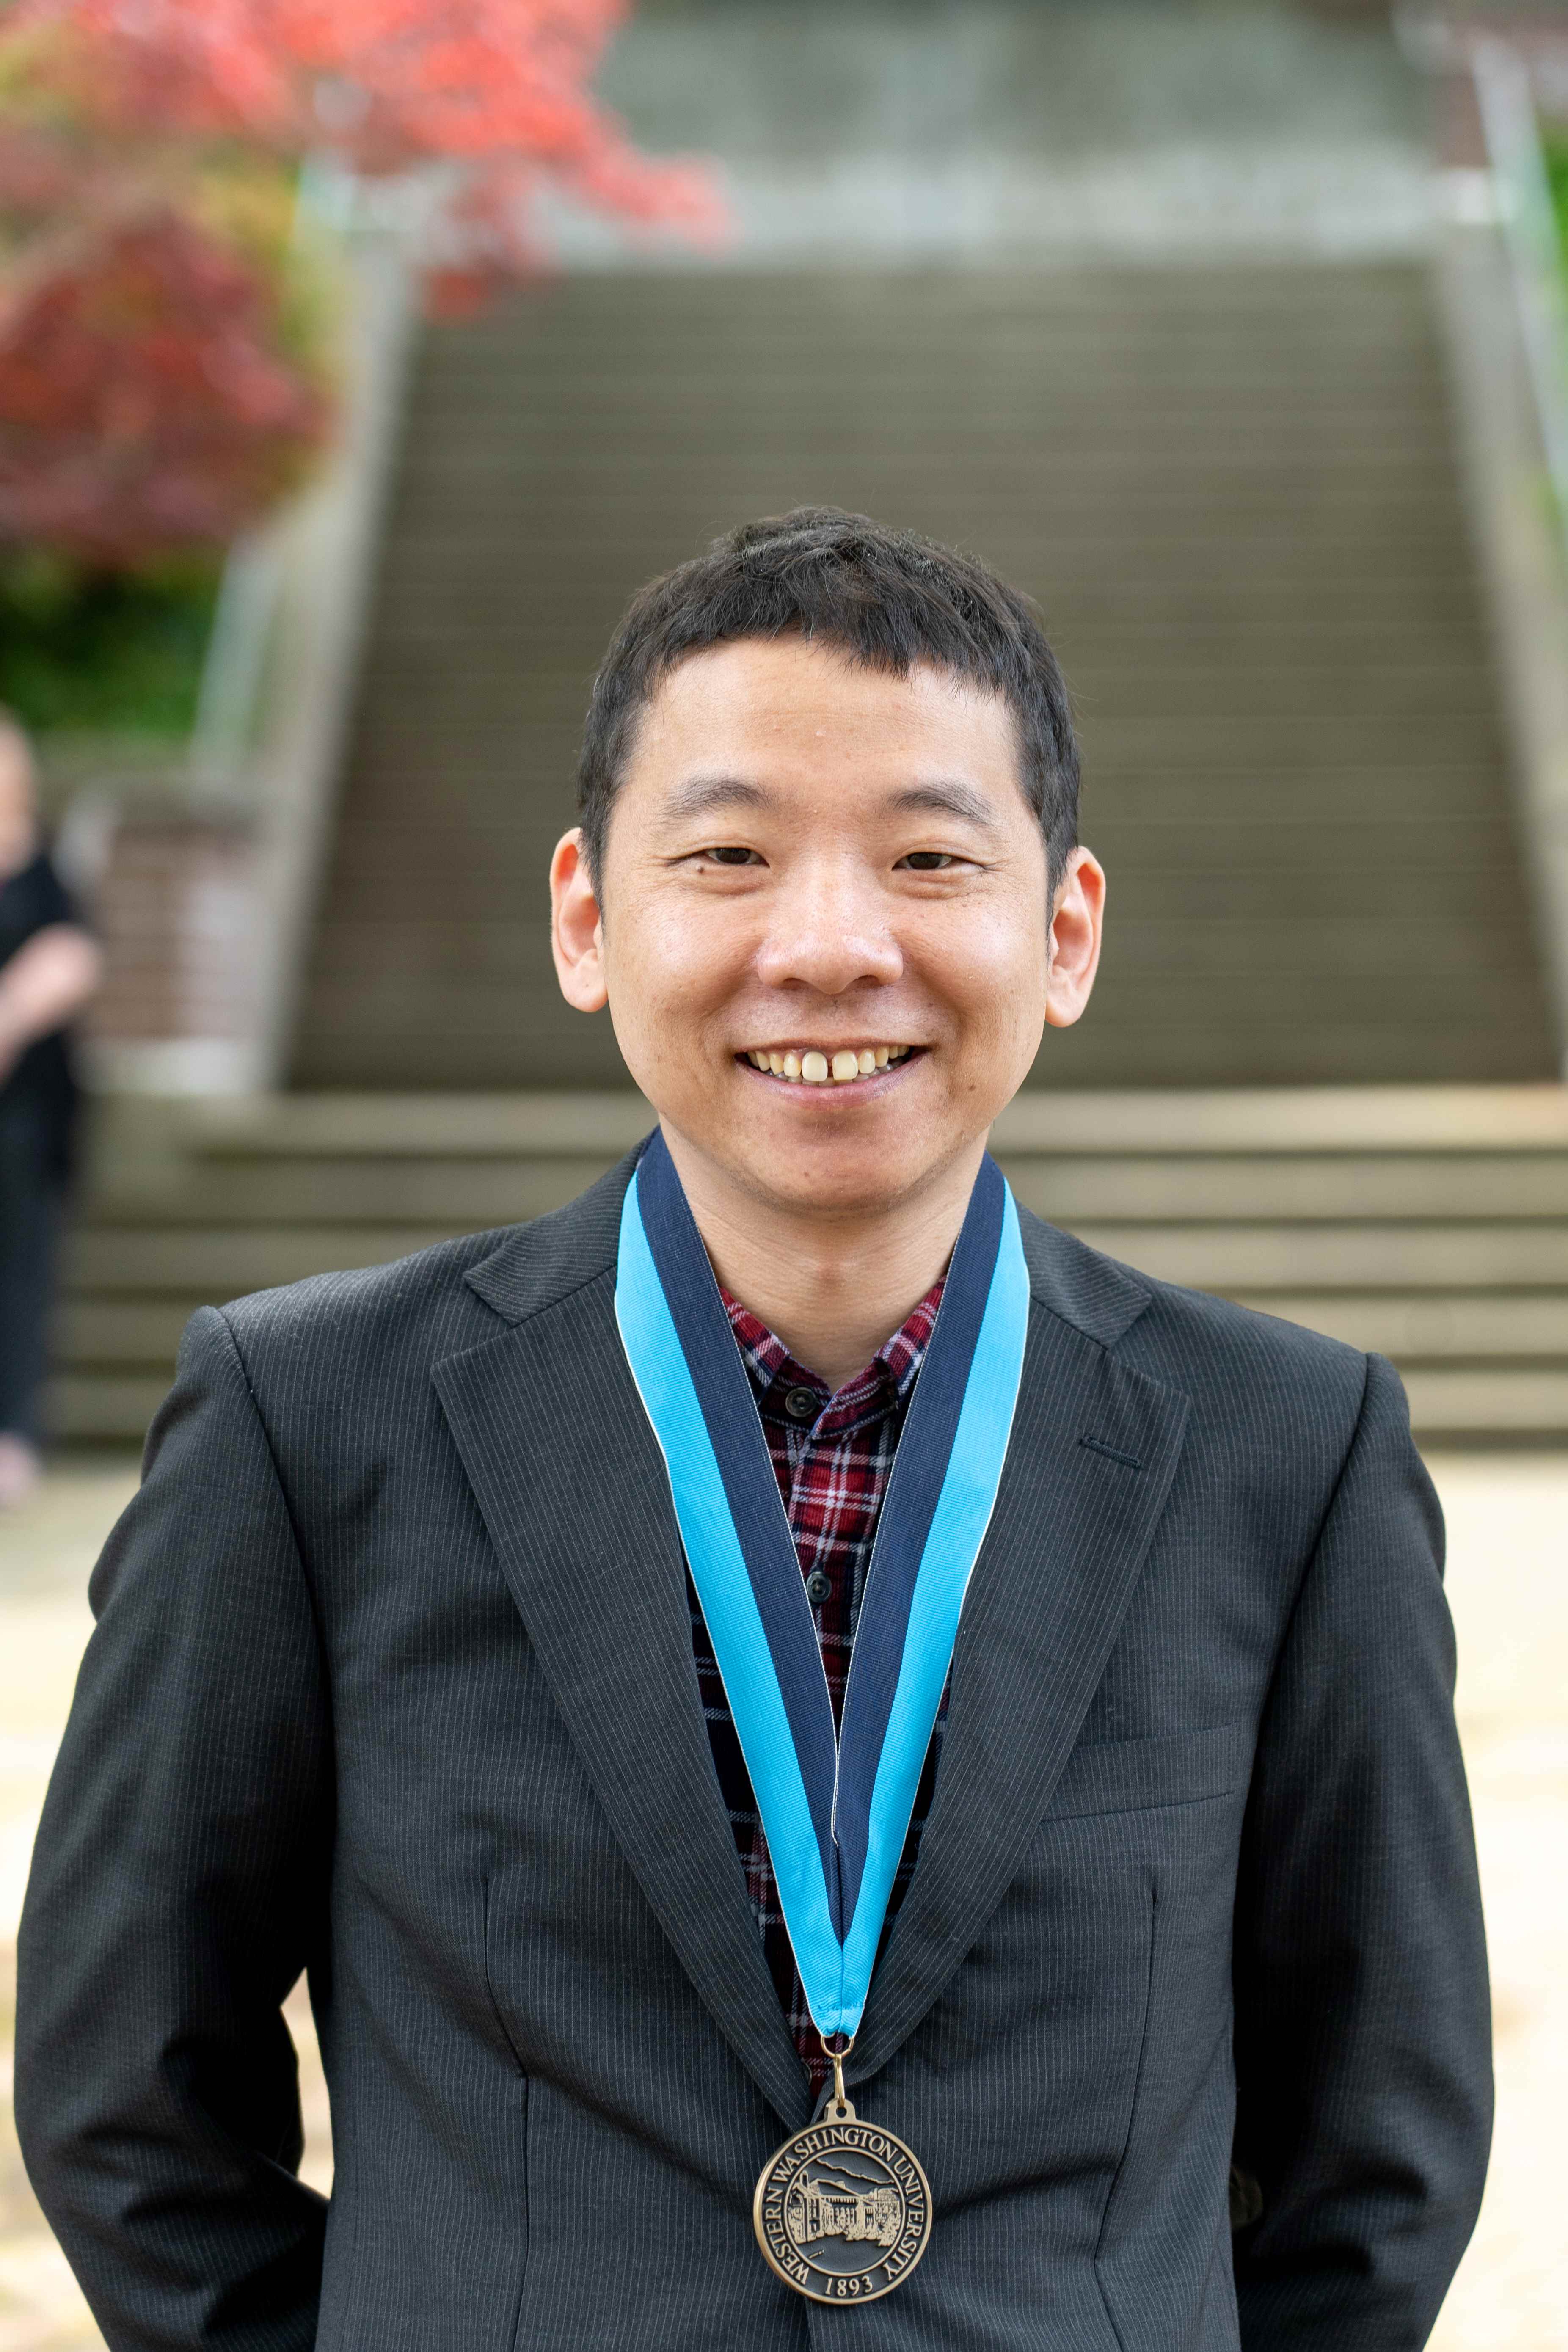 Kimihiro Noguchi smiling proudly in a suit jacket and wearing a WWU medallion on a ribbon.